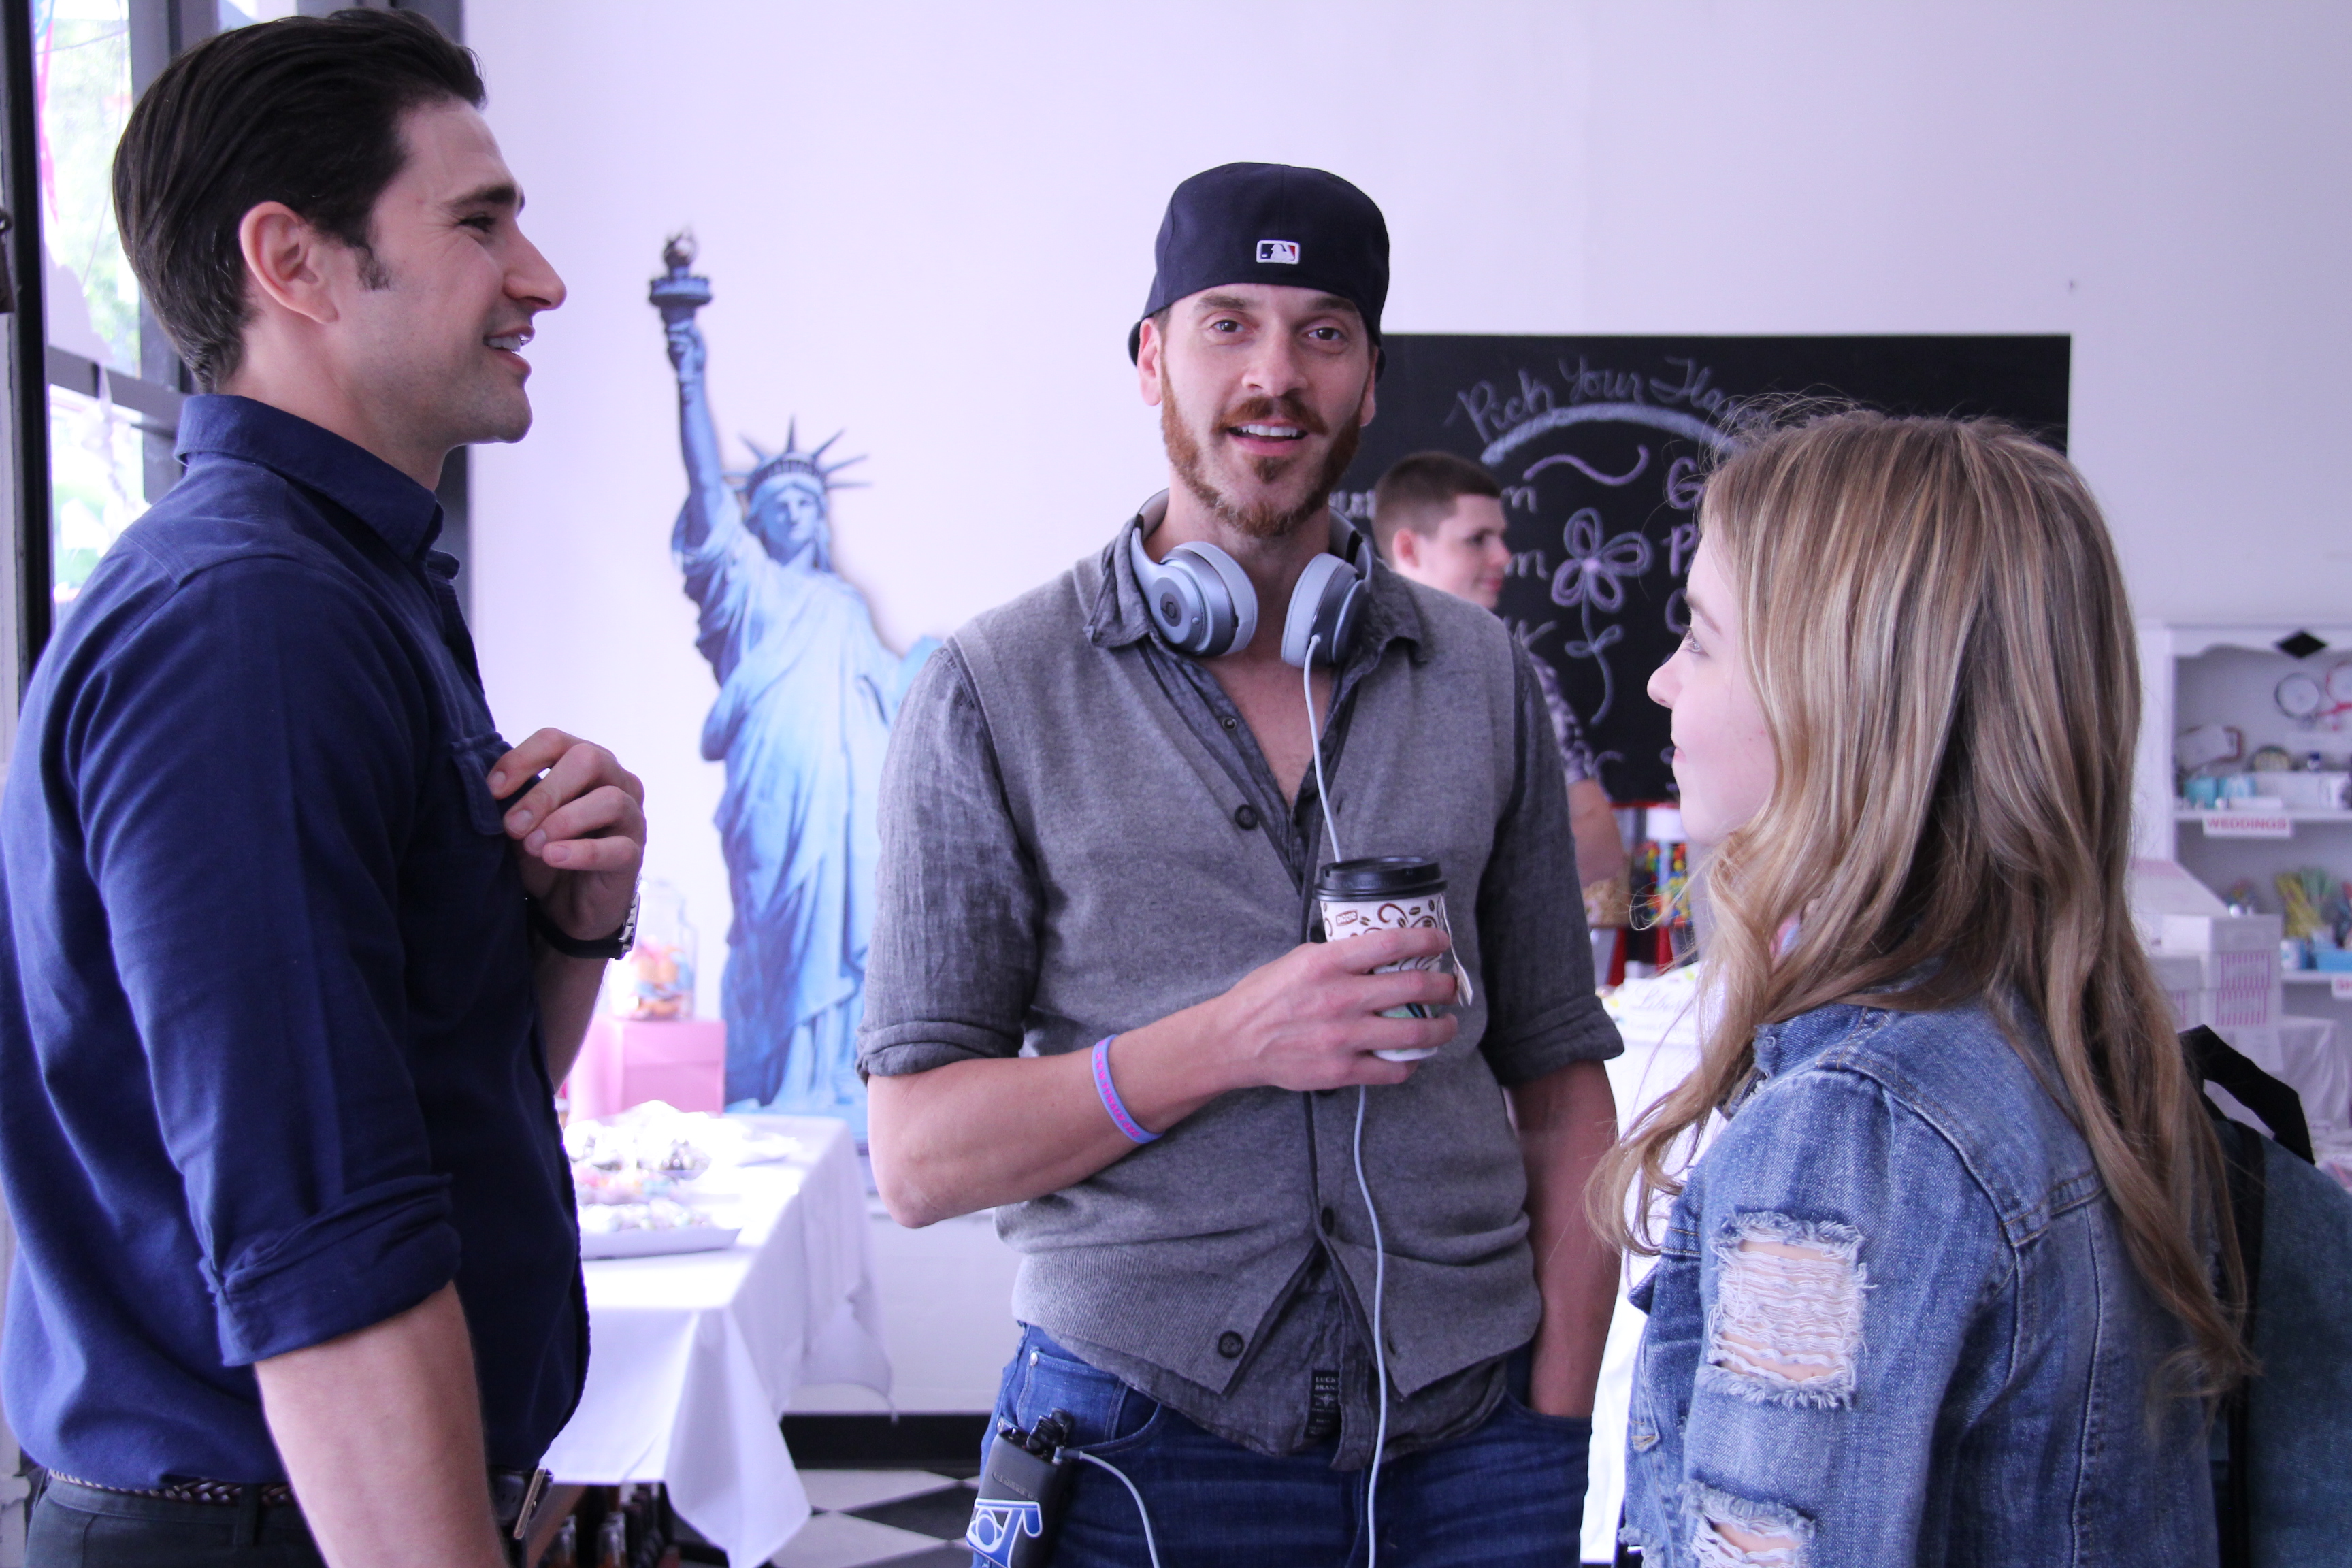 Behind the scenes of Tell Me Your Name with director Jason DeVan and actors Matt Dallas and Sydney Sweeney